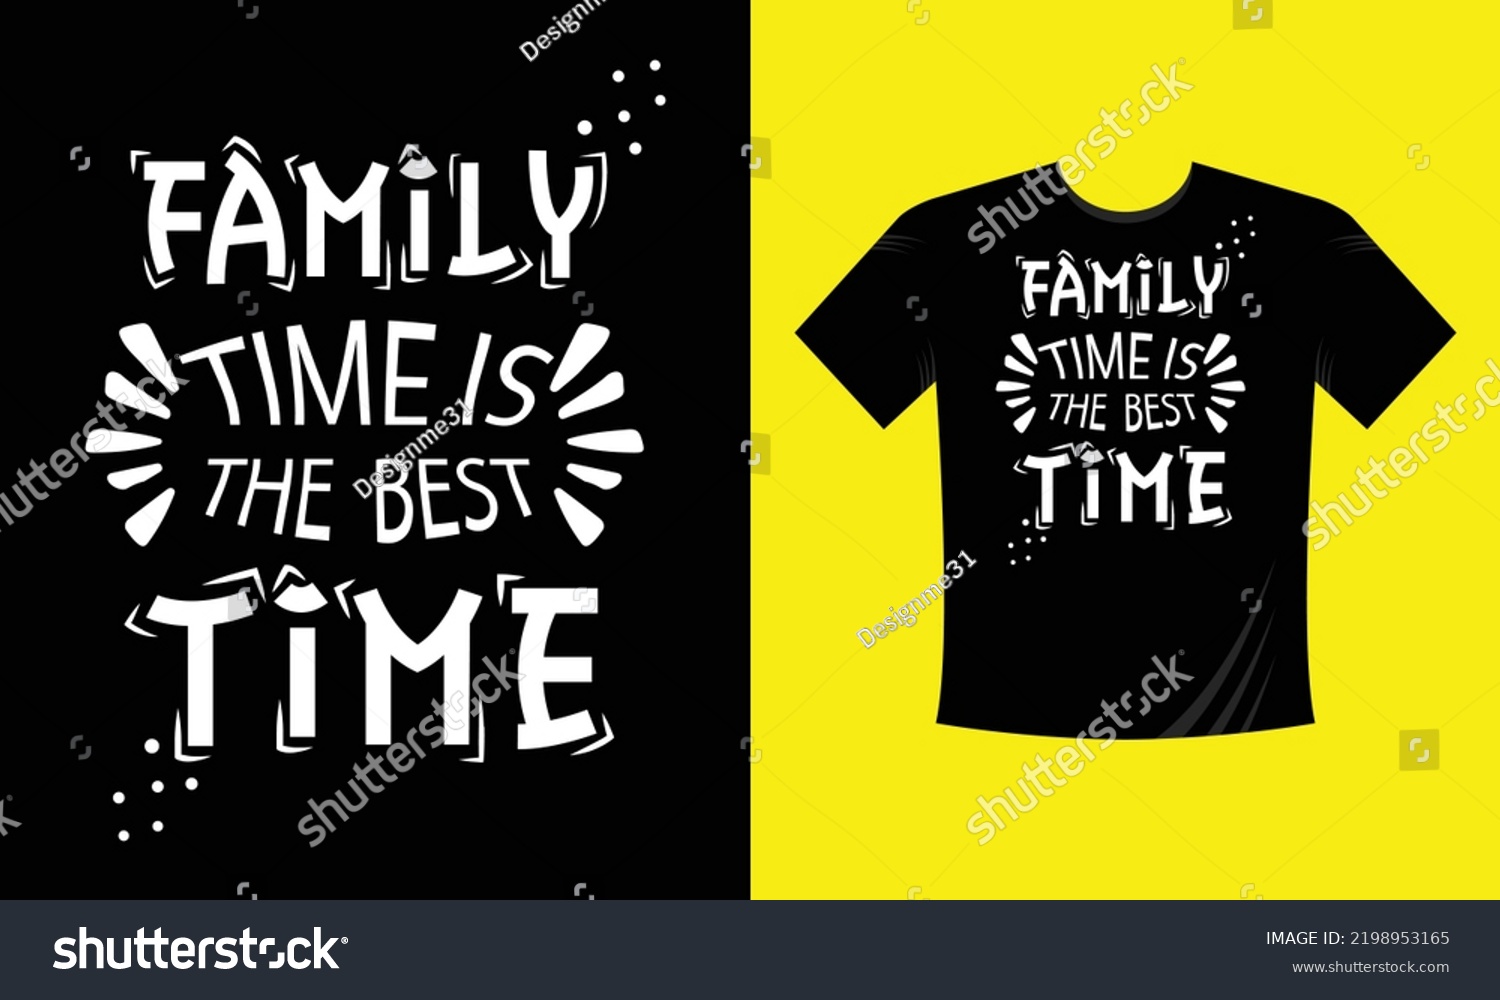 SVG of family time is the best time - Christmas t shirt design free vector svg design template  svg